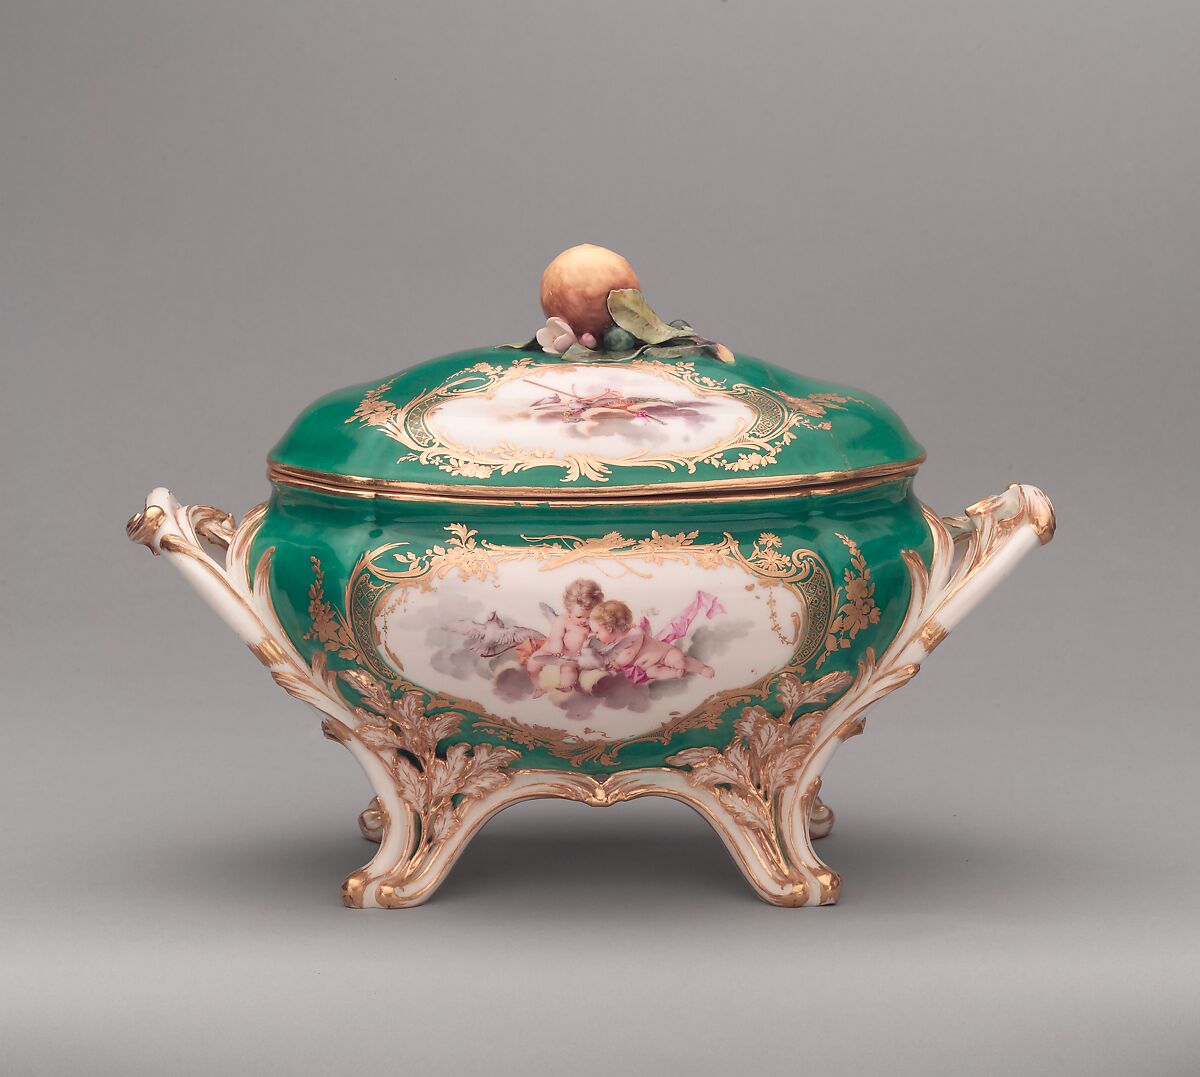 Tureen with cover (terrine du roi), Vincennes Manufactory (French, ca. 1740–1756), Soft-paste porcelain, French, Vincennes 